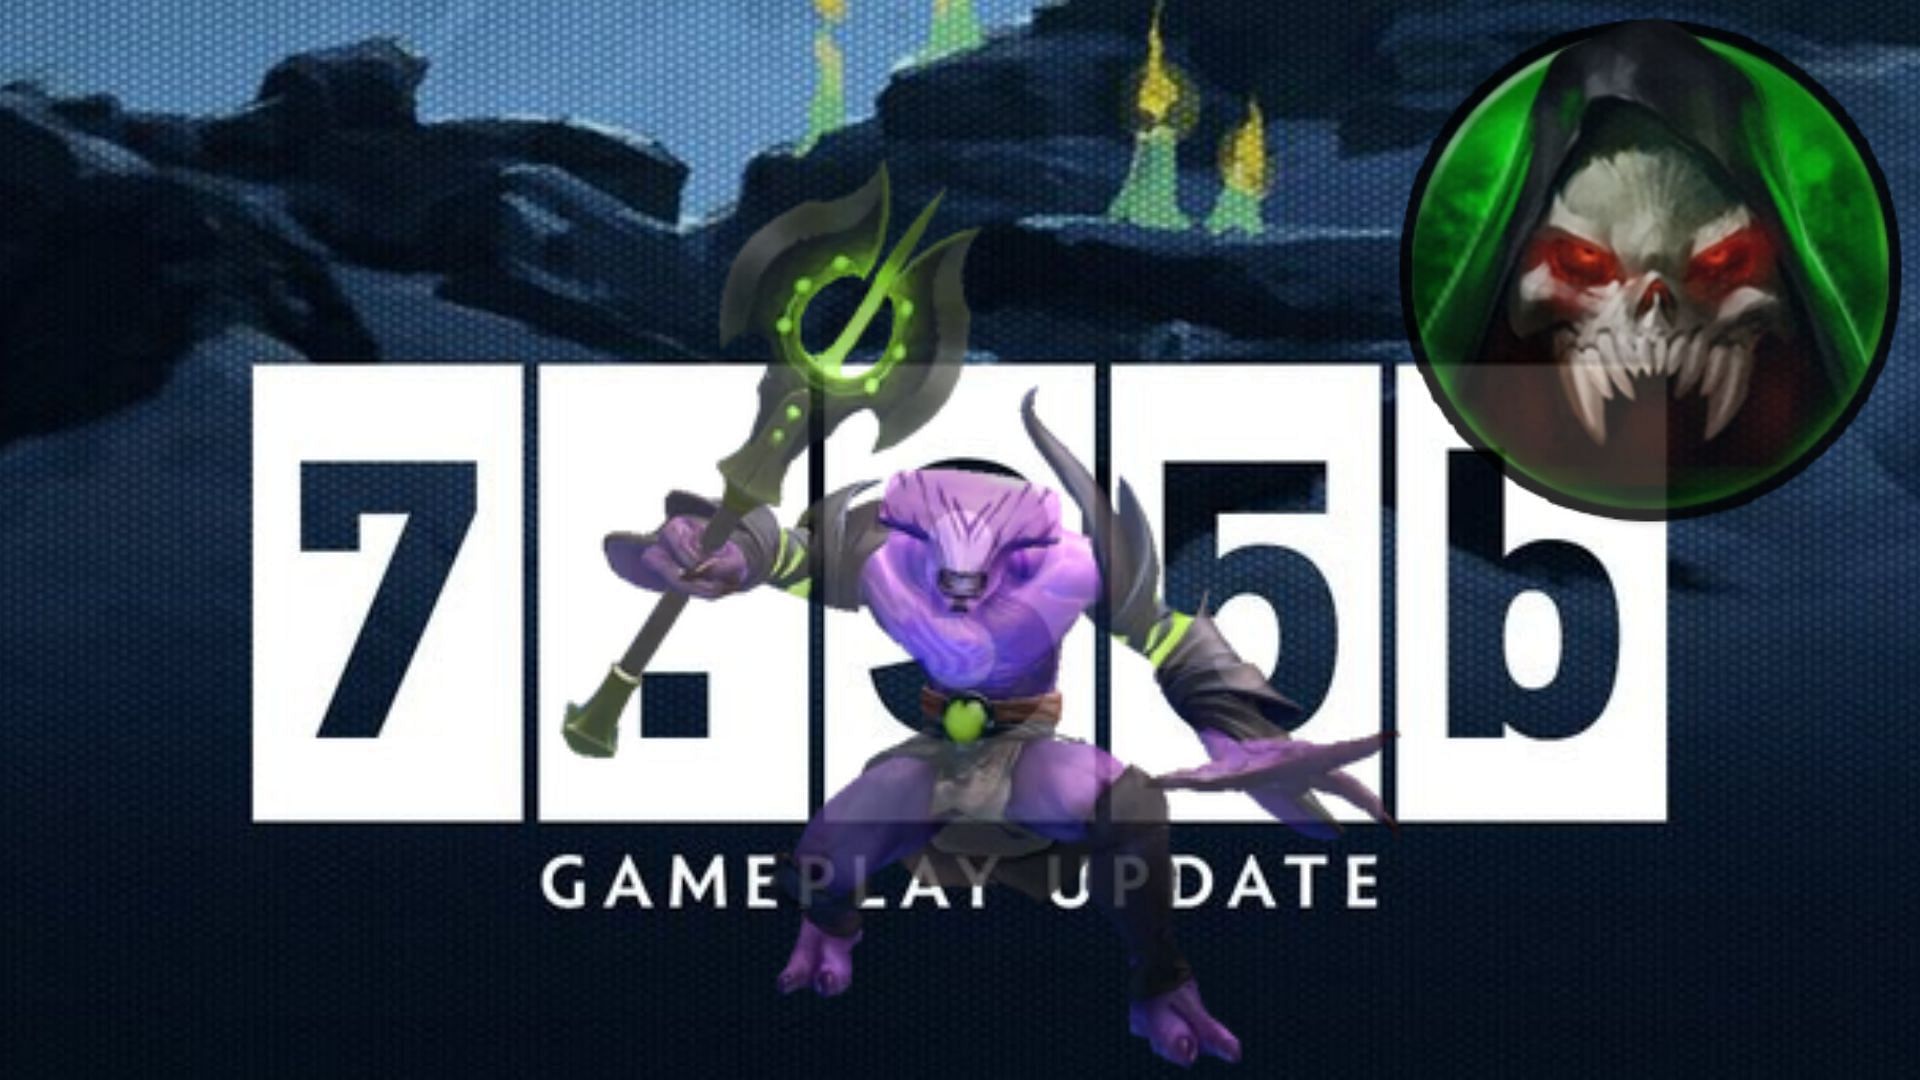 Featured cover of 7.35b changes (Image via Valve and Sportskeeda)